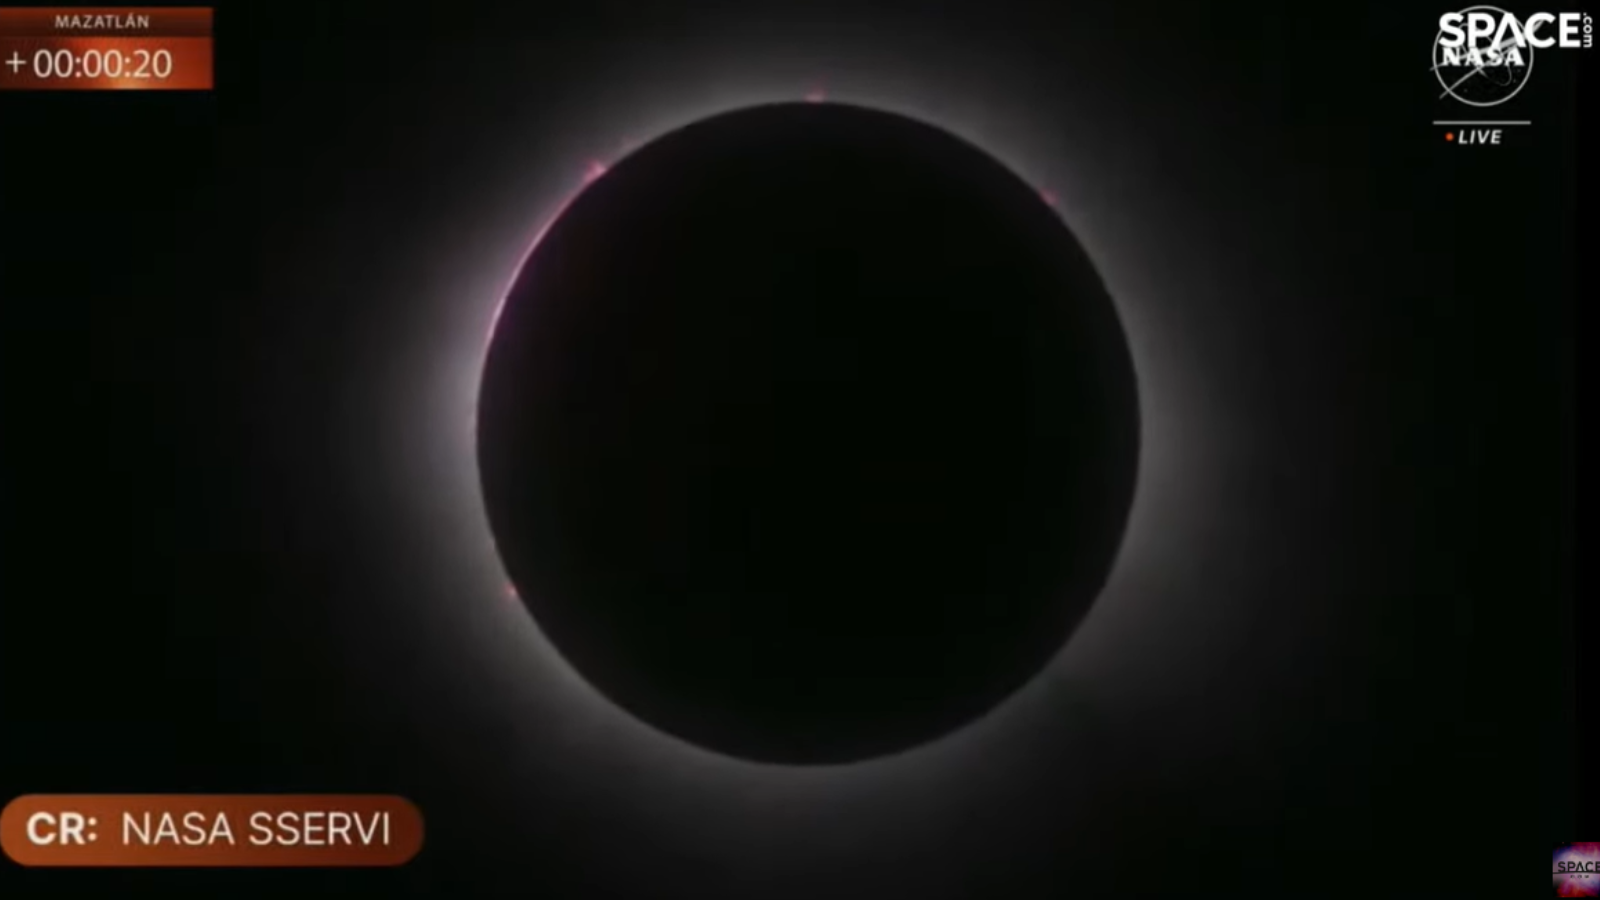 The first region to experience totality during the total solar eclipse on April 8, 2024, is Mazatlan, Mexico. Here, the moon is seen covering the sun at around 11:10 local time (14:10 EDT/18:10 GMT).